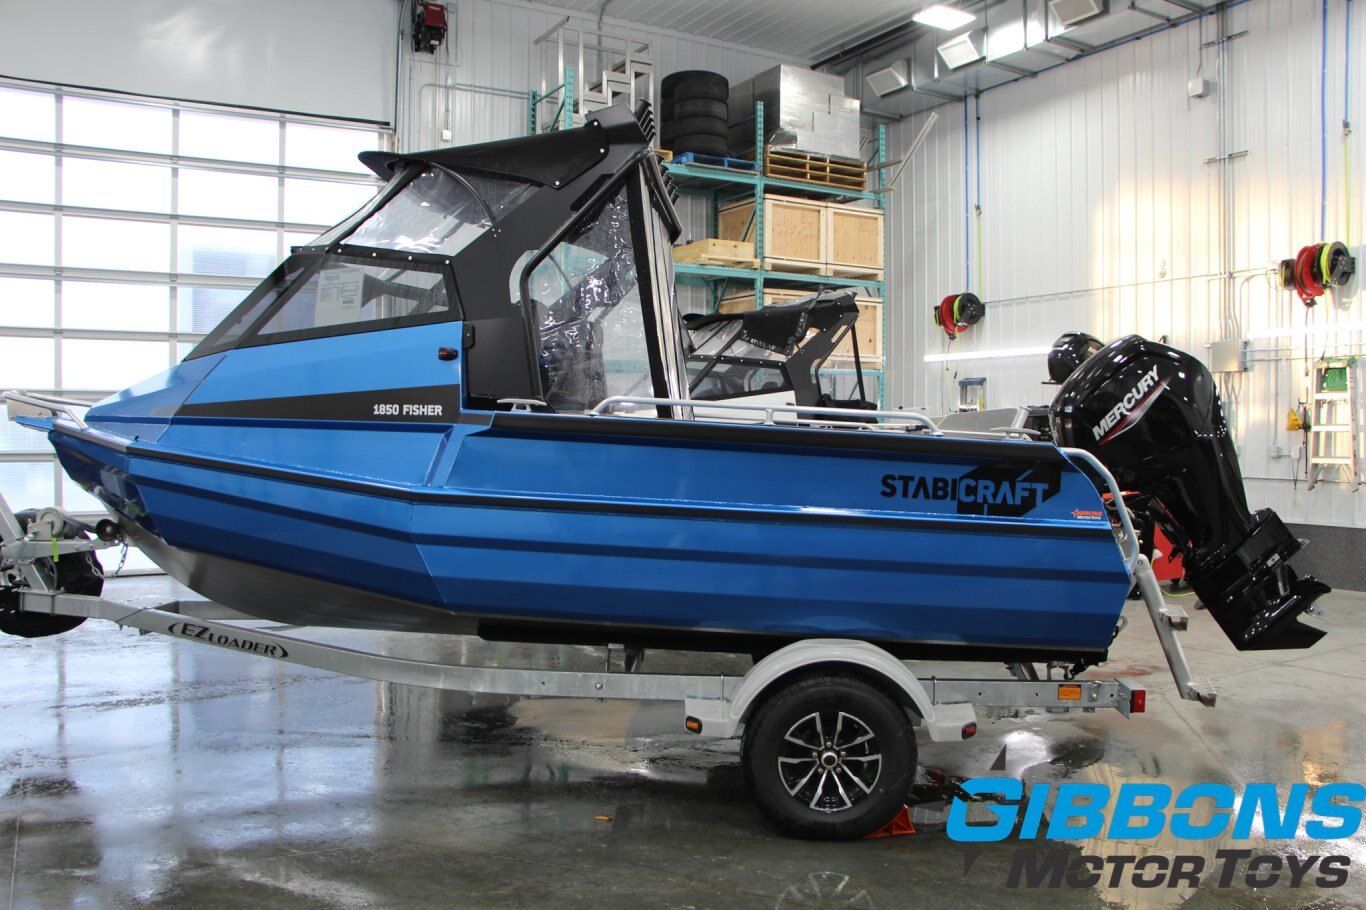 2023 Stabicraft 1850 Fisher Offshore